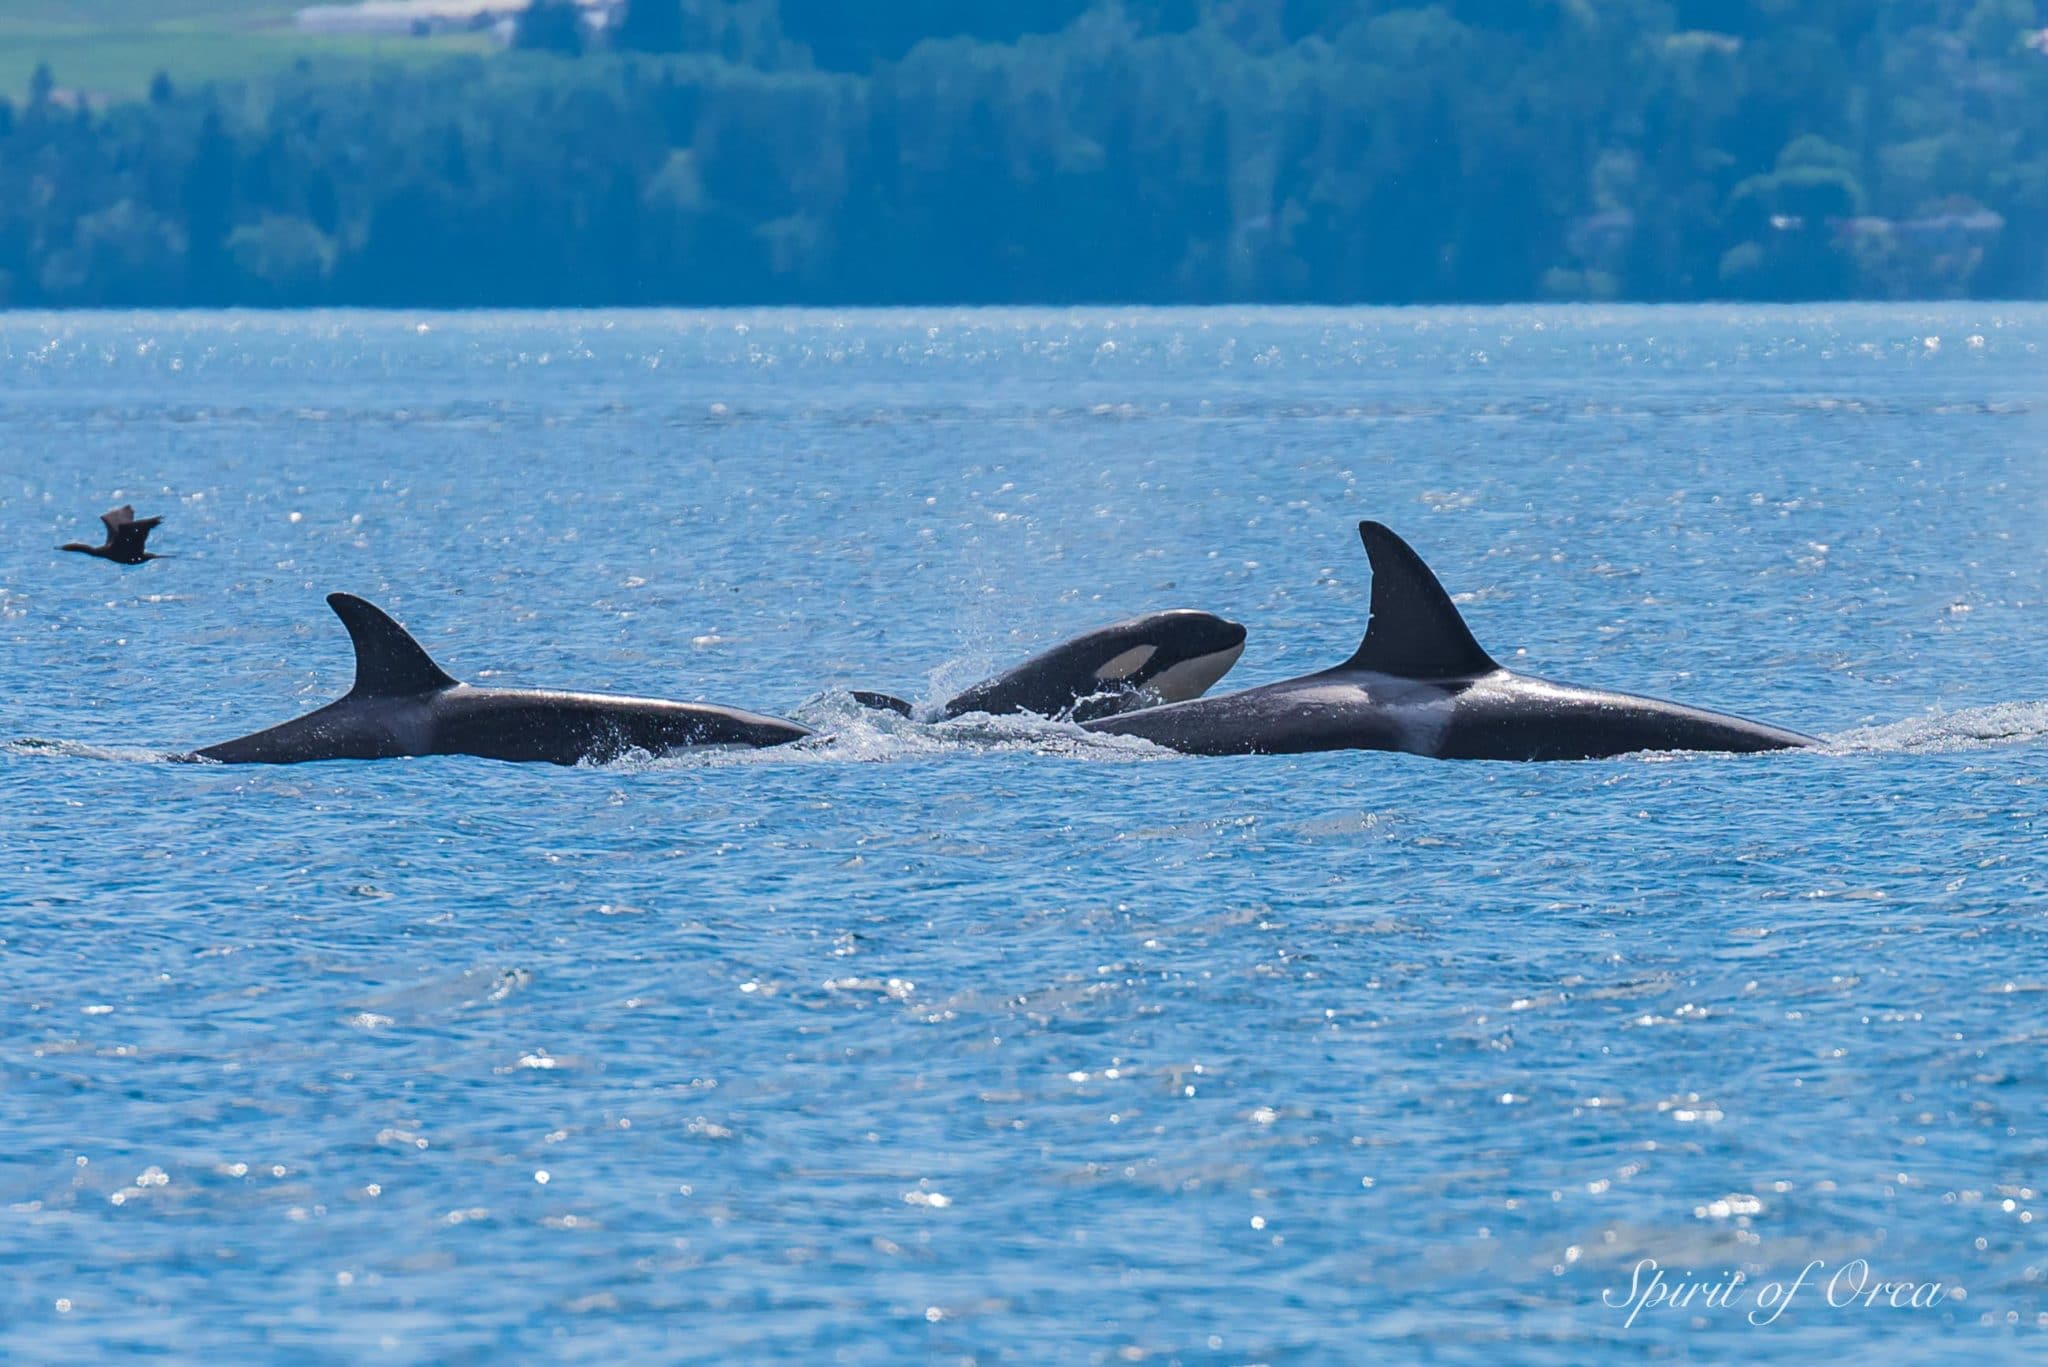 T41's and T100B's Orca with calf